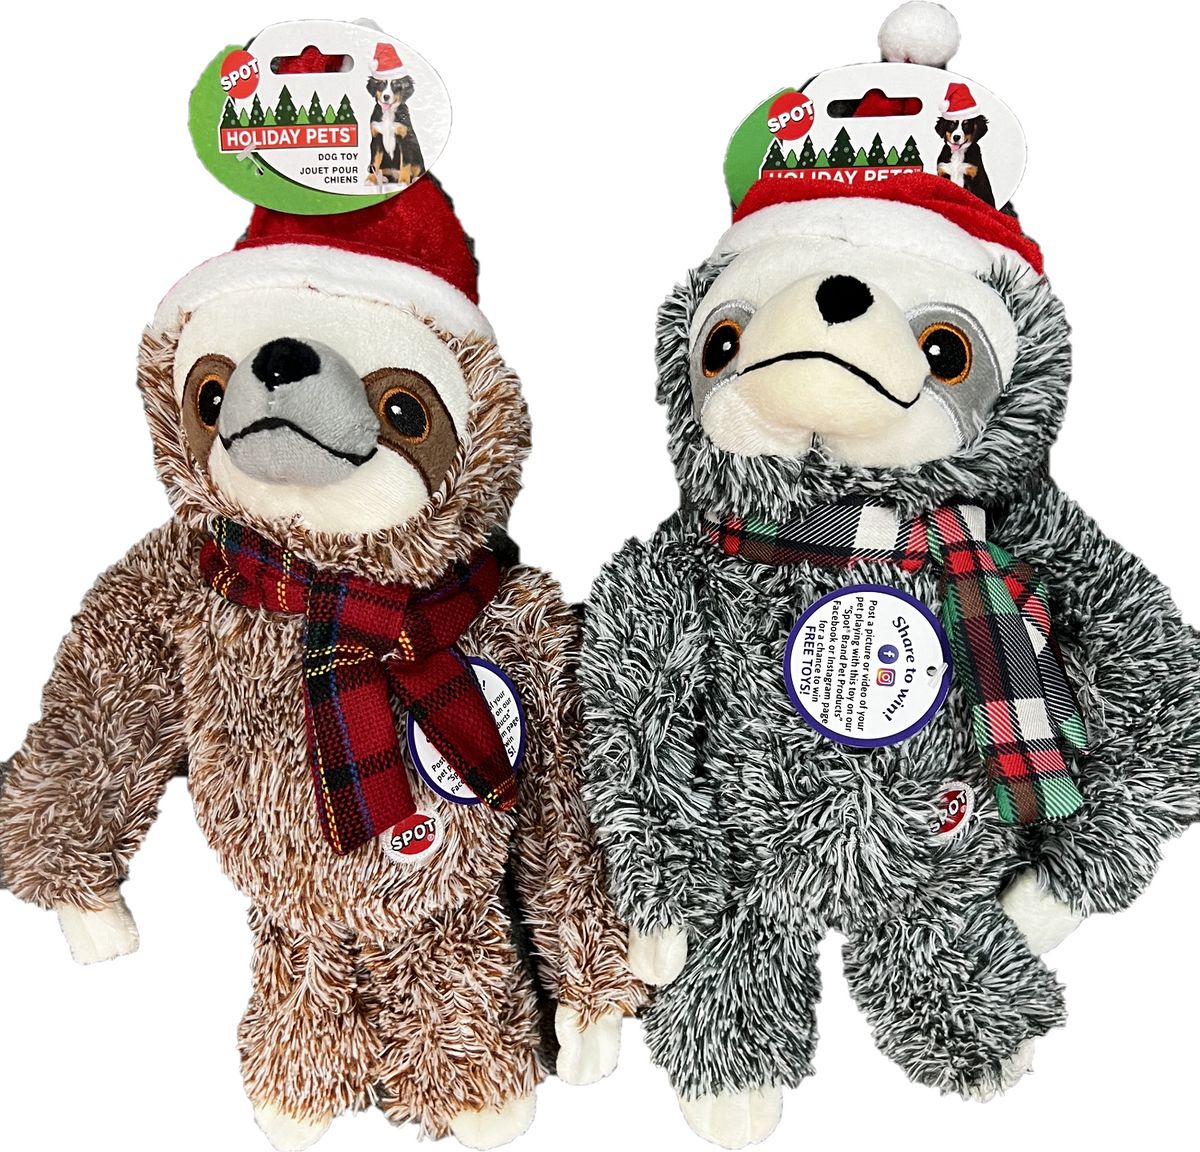 Ethical Products Holiday Christmas Sloth Squeaker Plush Dog Toys 12" Assorted